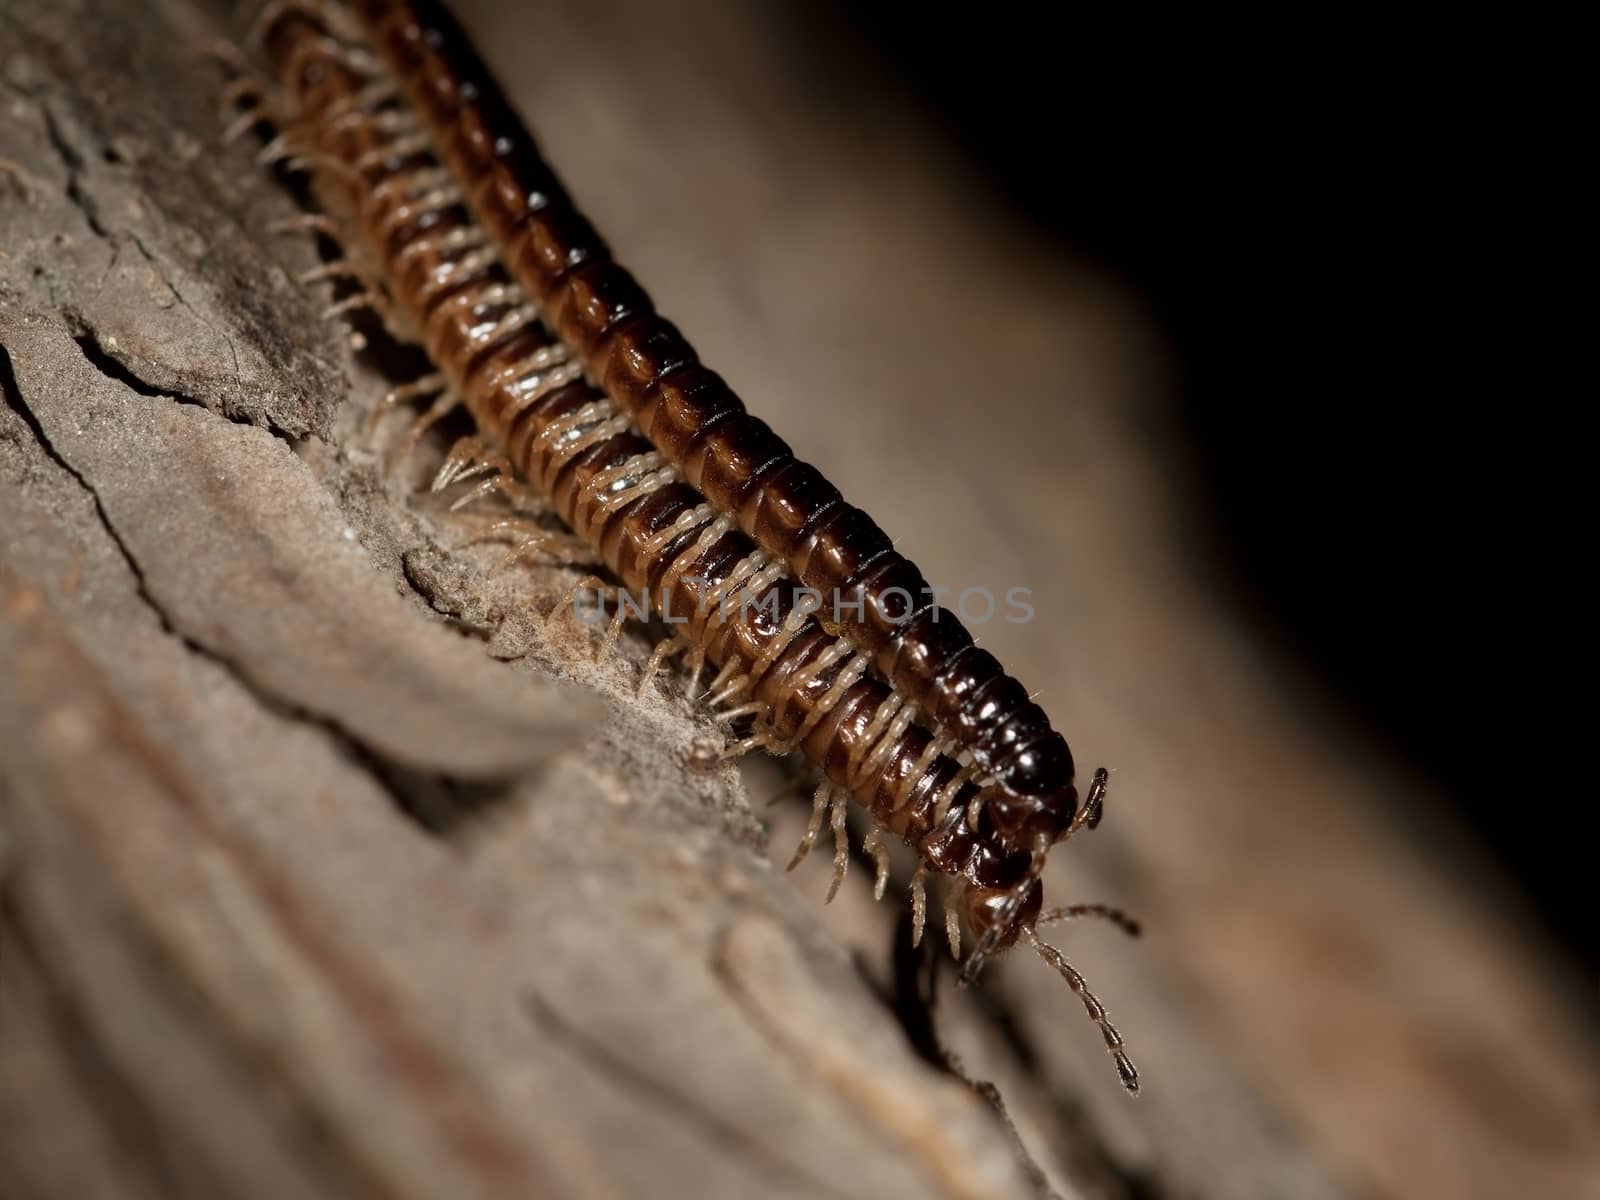 Two centipedes on a tree bark by dsmsoft